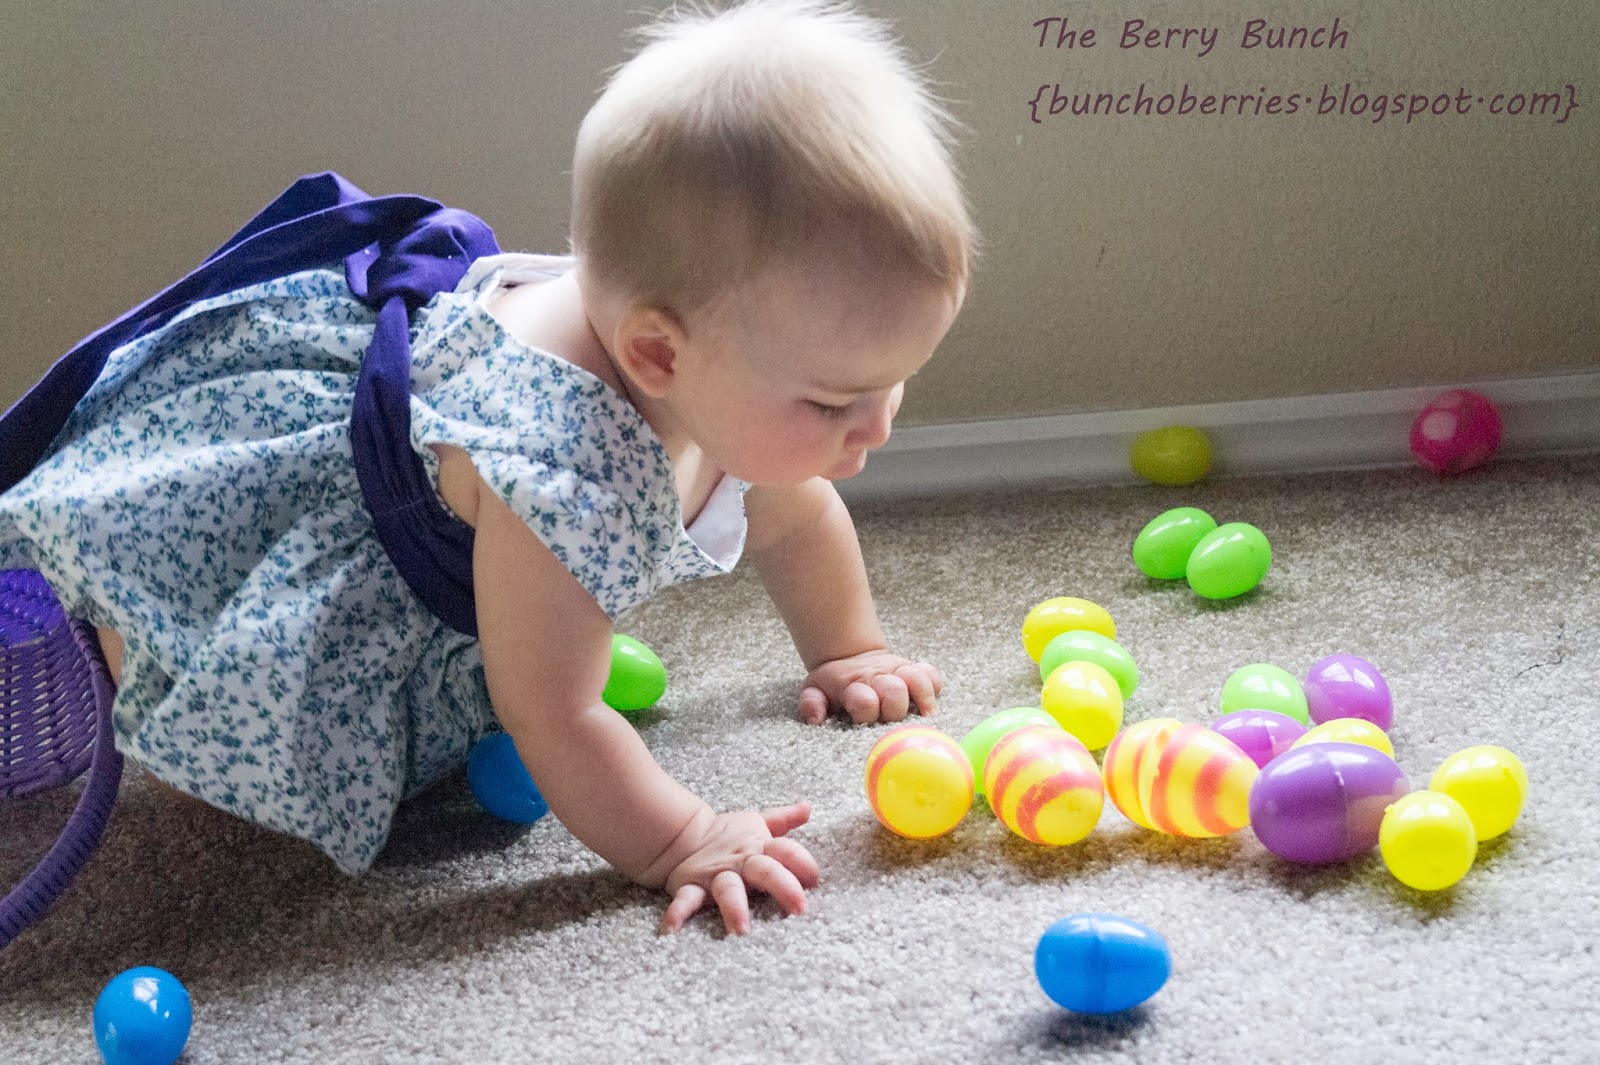 The Berry Bunch: Kenzie's Party Dress - Blog tour 2/14-2/21 {EYMM Patterns}